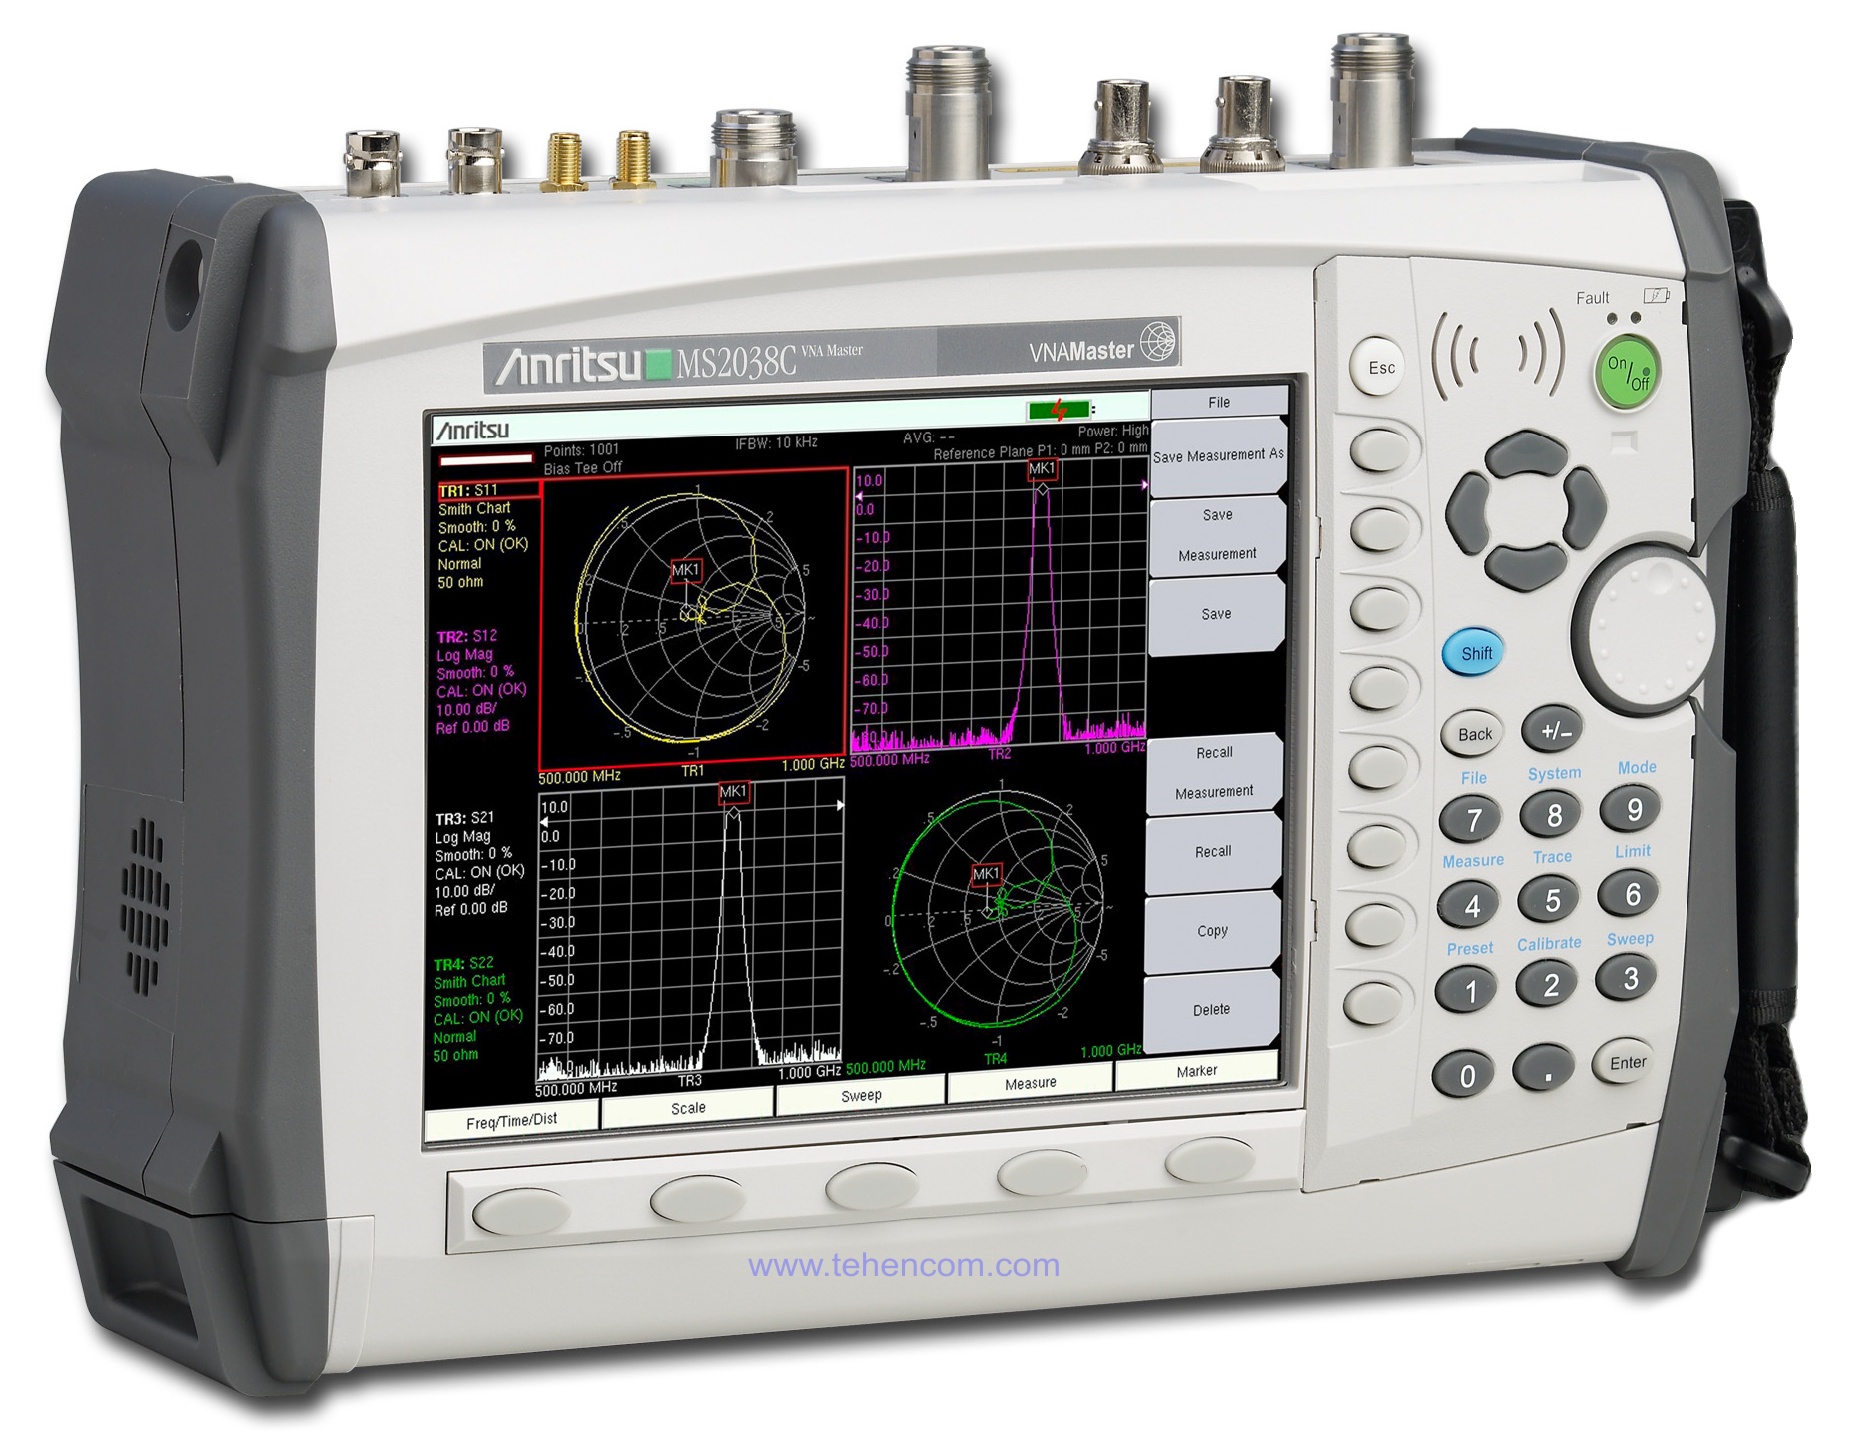 Anritsu MS2038C is the top model of the MS20xxC VNA Master series of analyzers, which combines a vector network analyzer (5 kHz - 20 GHz) and a spectrum analyzer (9 kHz - 20 GHz) in a compact package